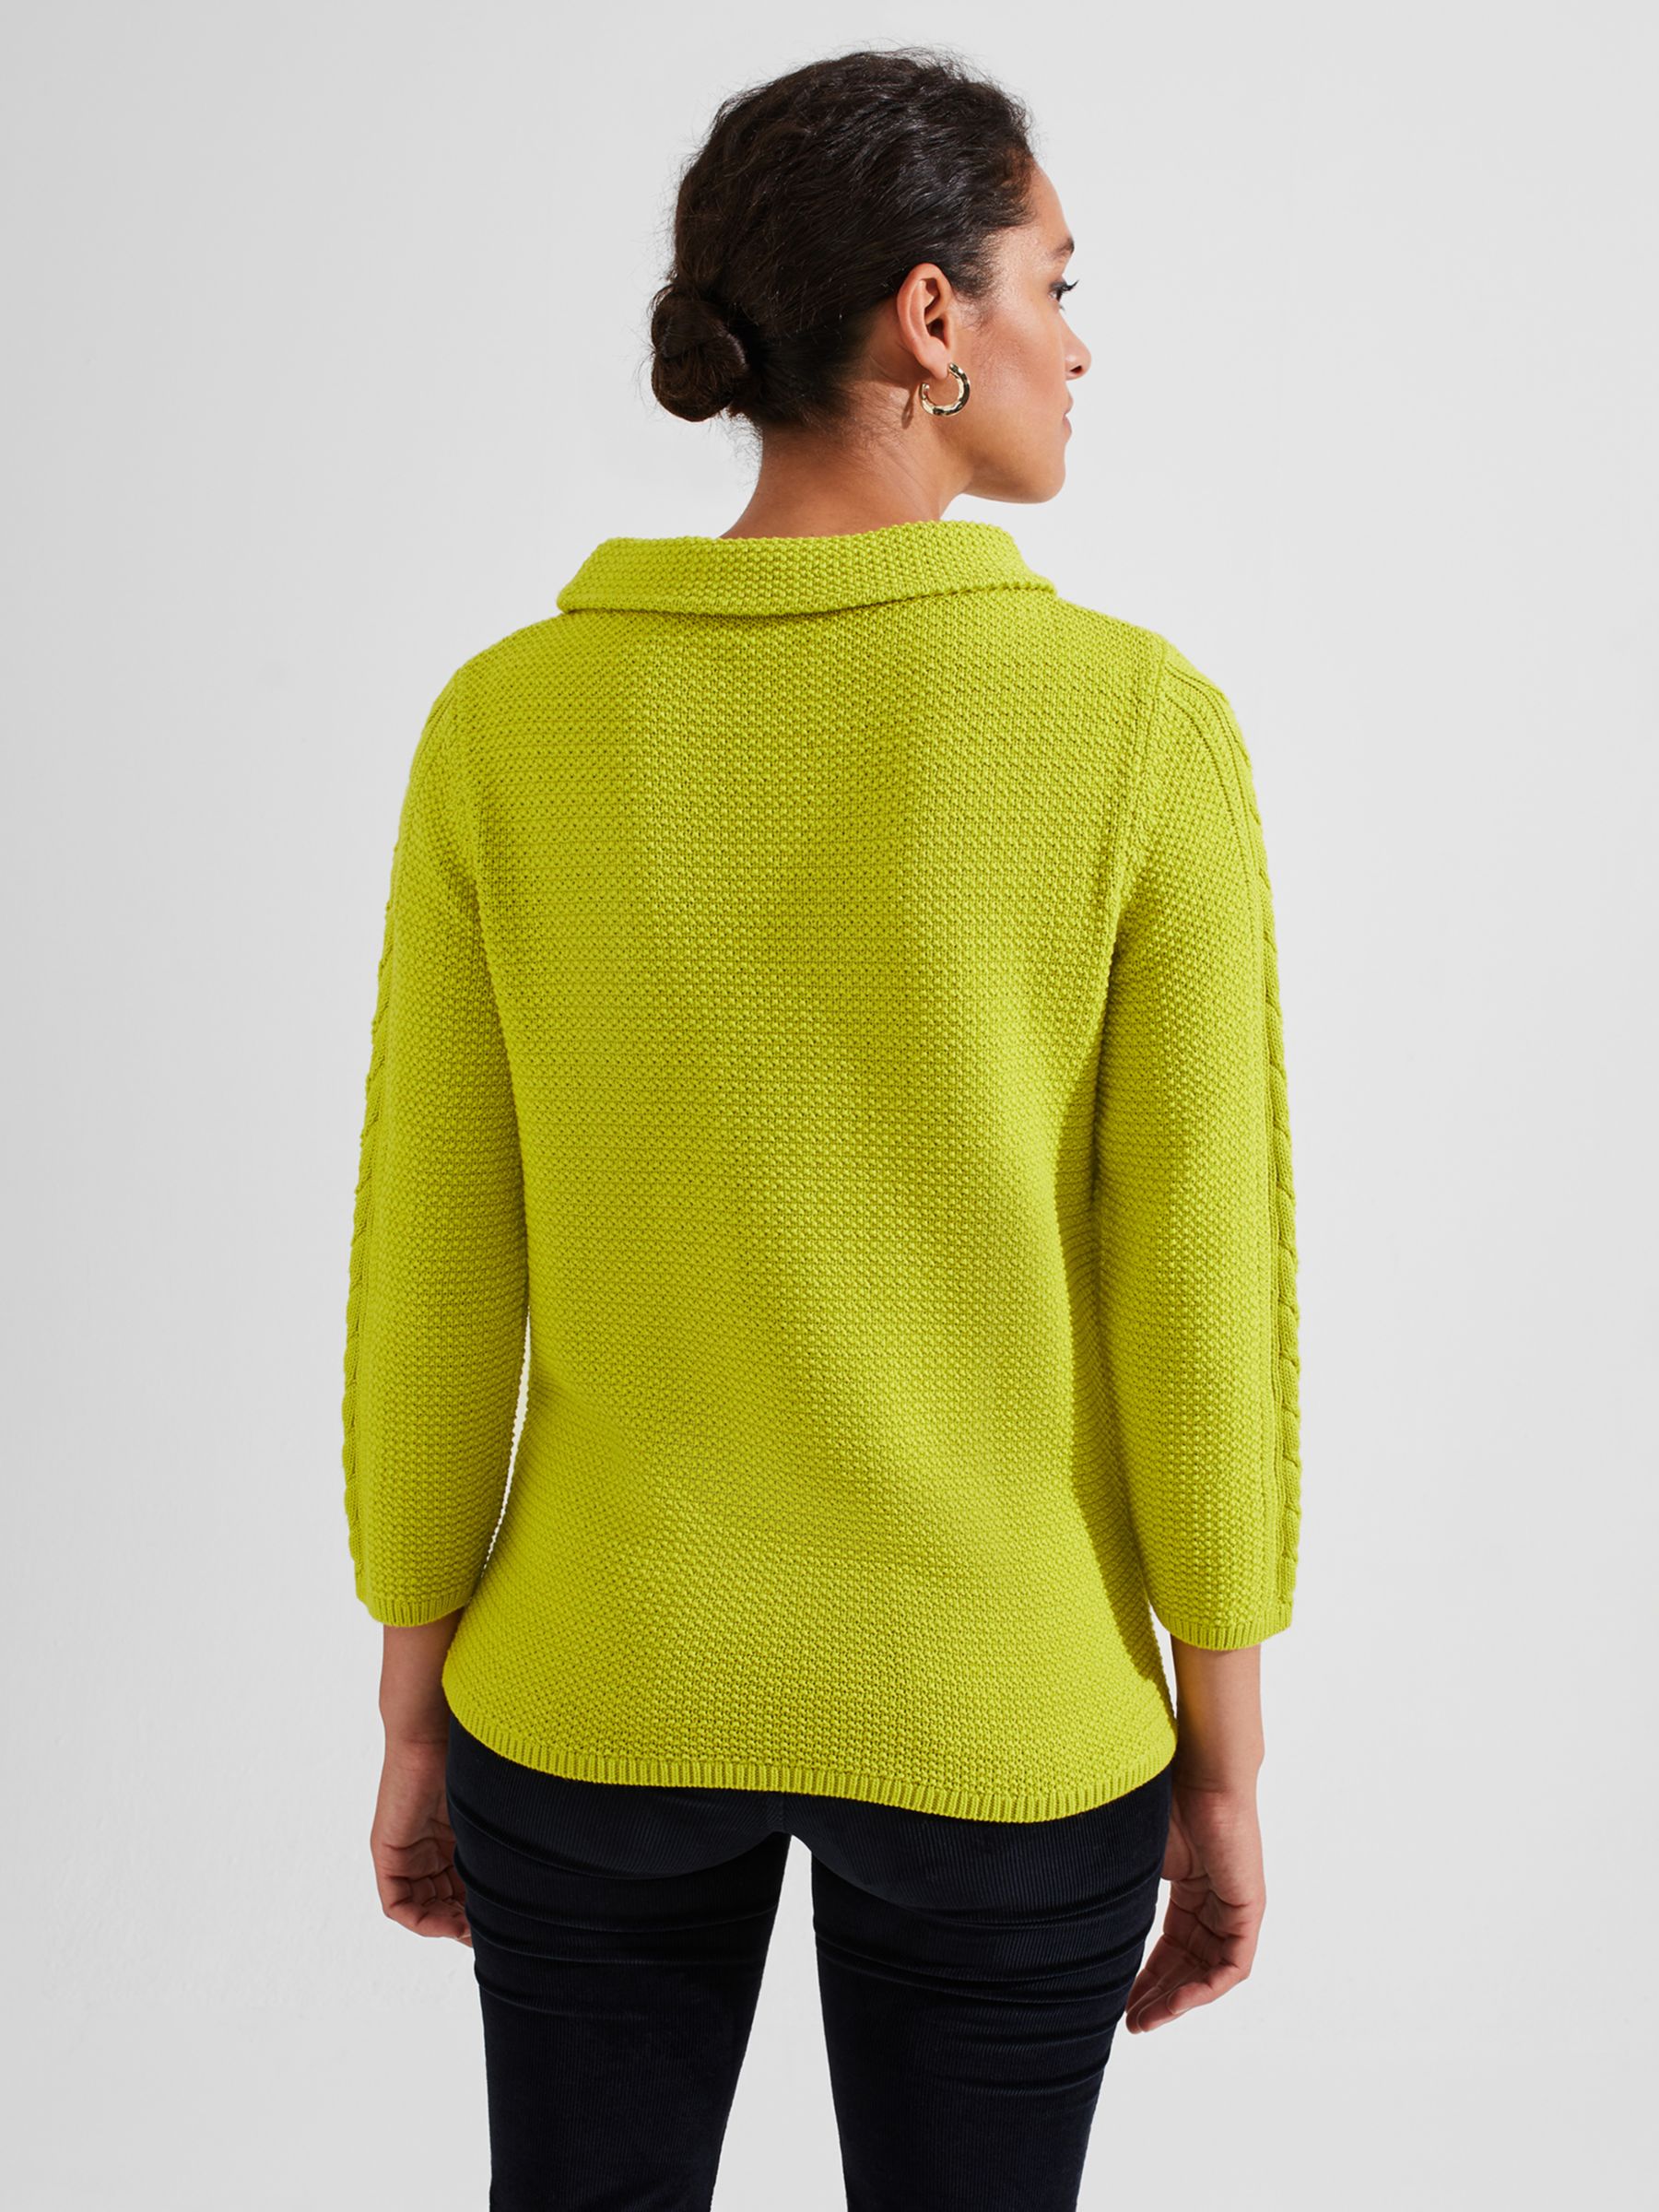 Hobbs Camilla Cable Knit Detail Jumper, Lime, L